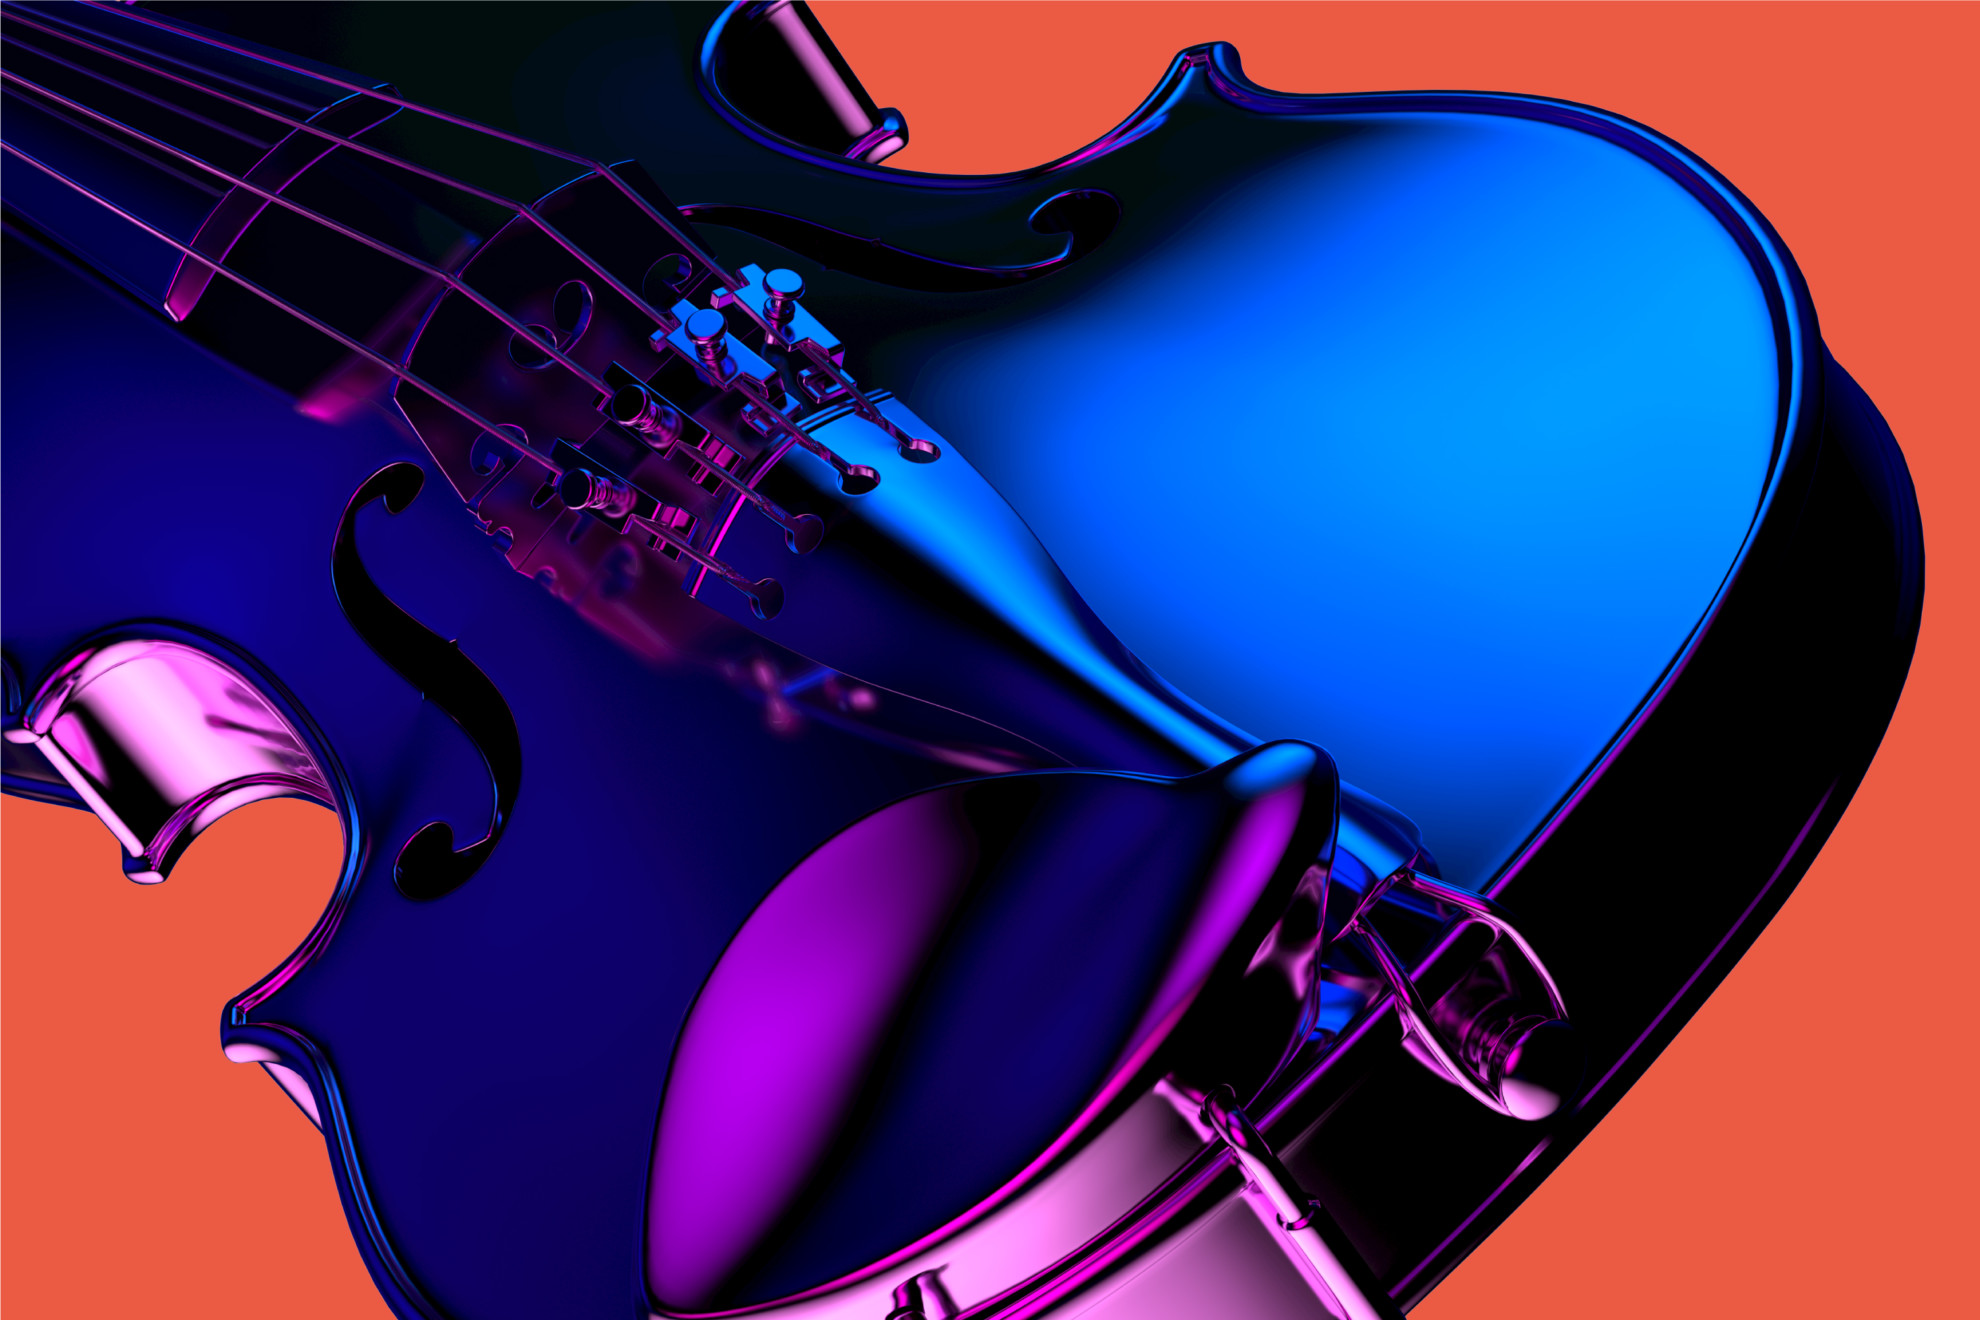 Campaign featuring 3d rendered instruments created by Studio Brave for The Australian National Academy of Music 2020 Season